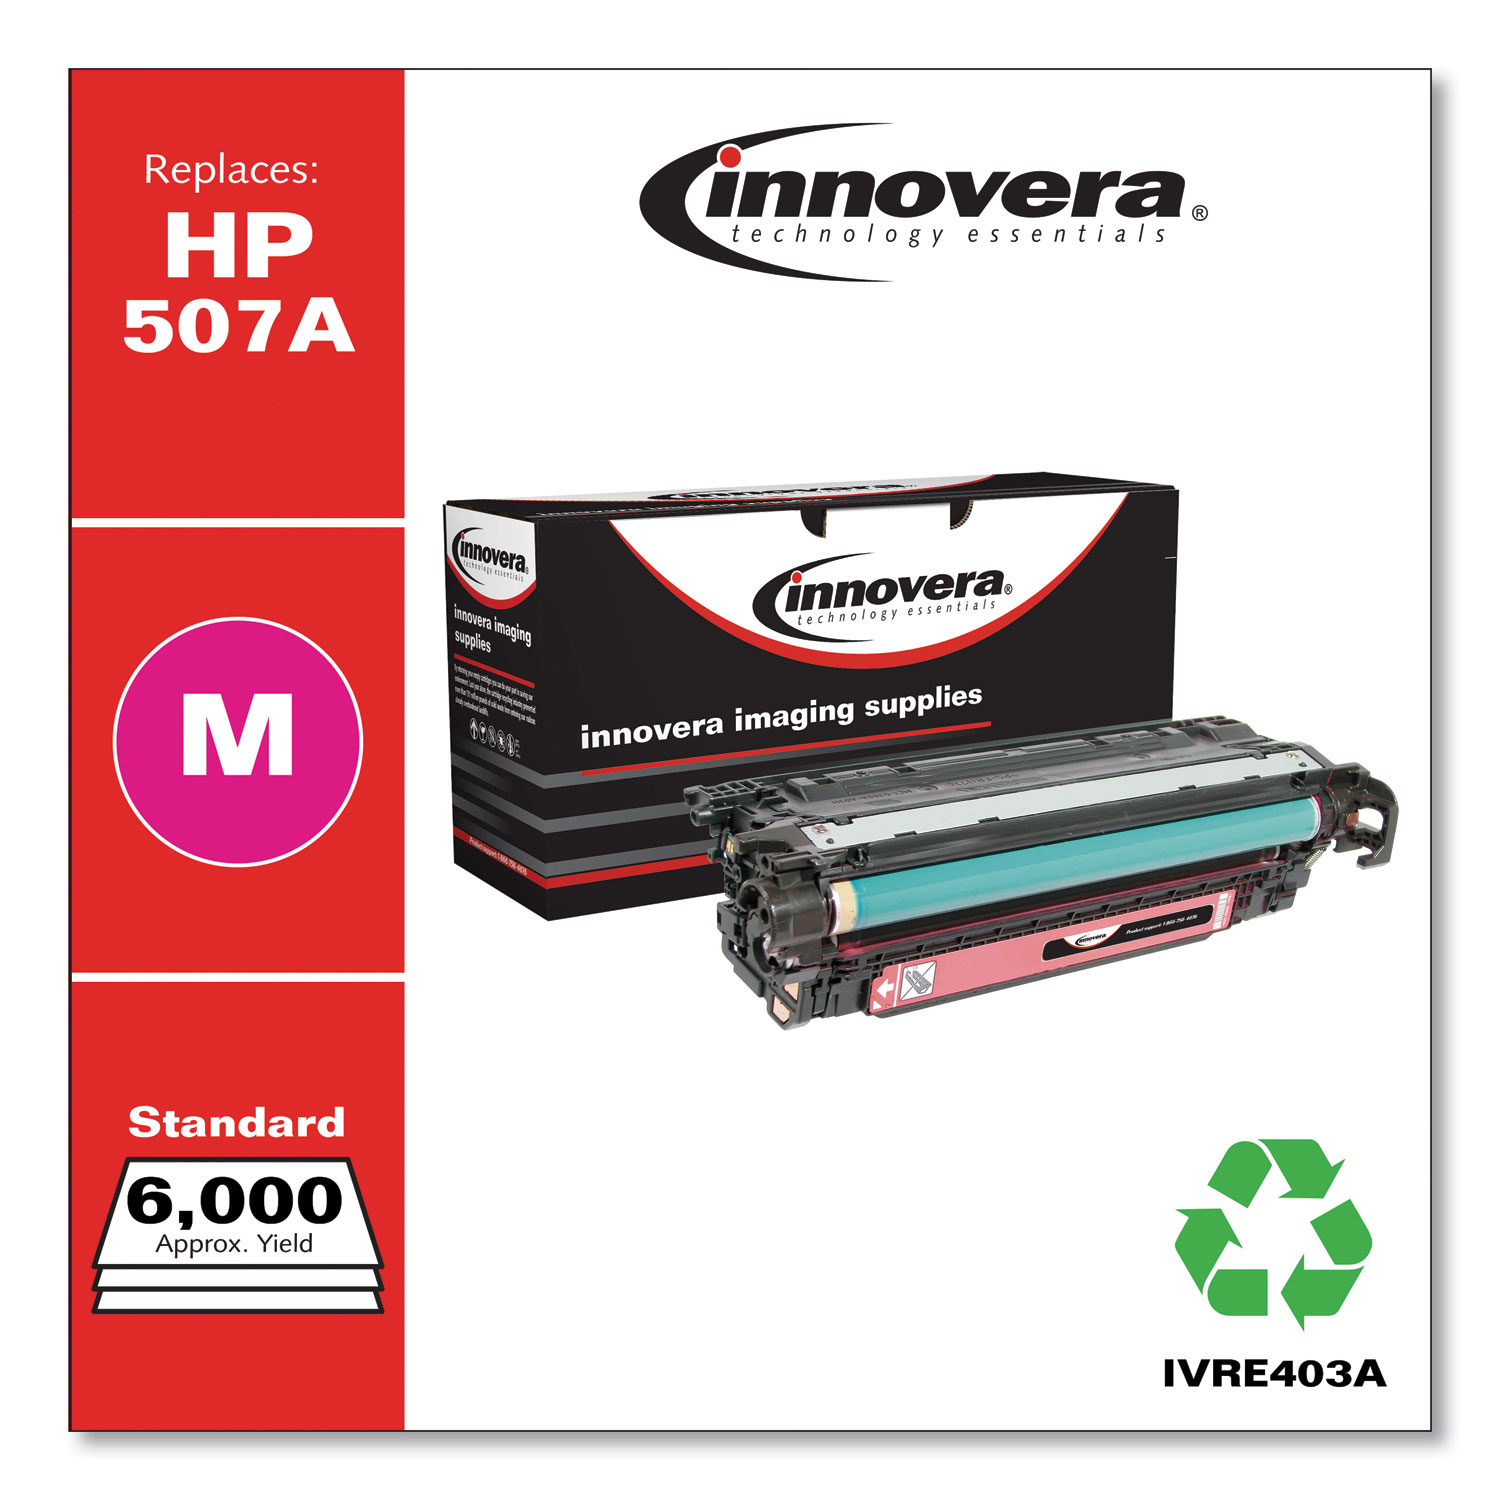  Innovera IVRE403A Remanufactured CE403A (507A) Toner, 6000 Page-Yield, Magenta (IVRE403A) 